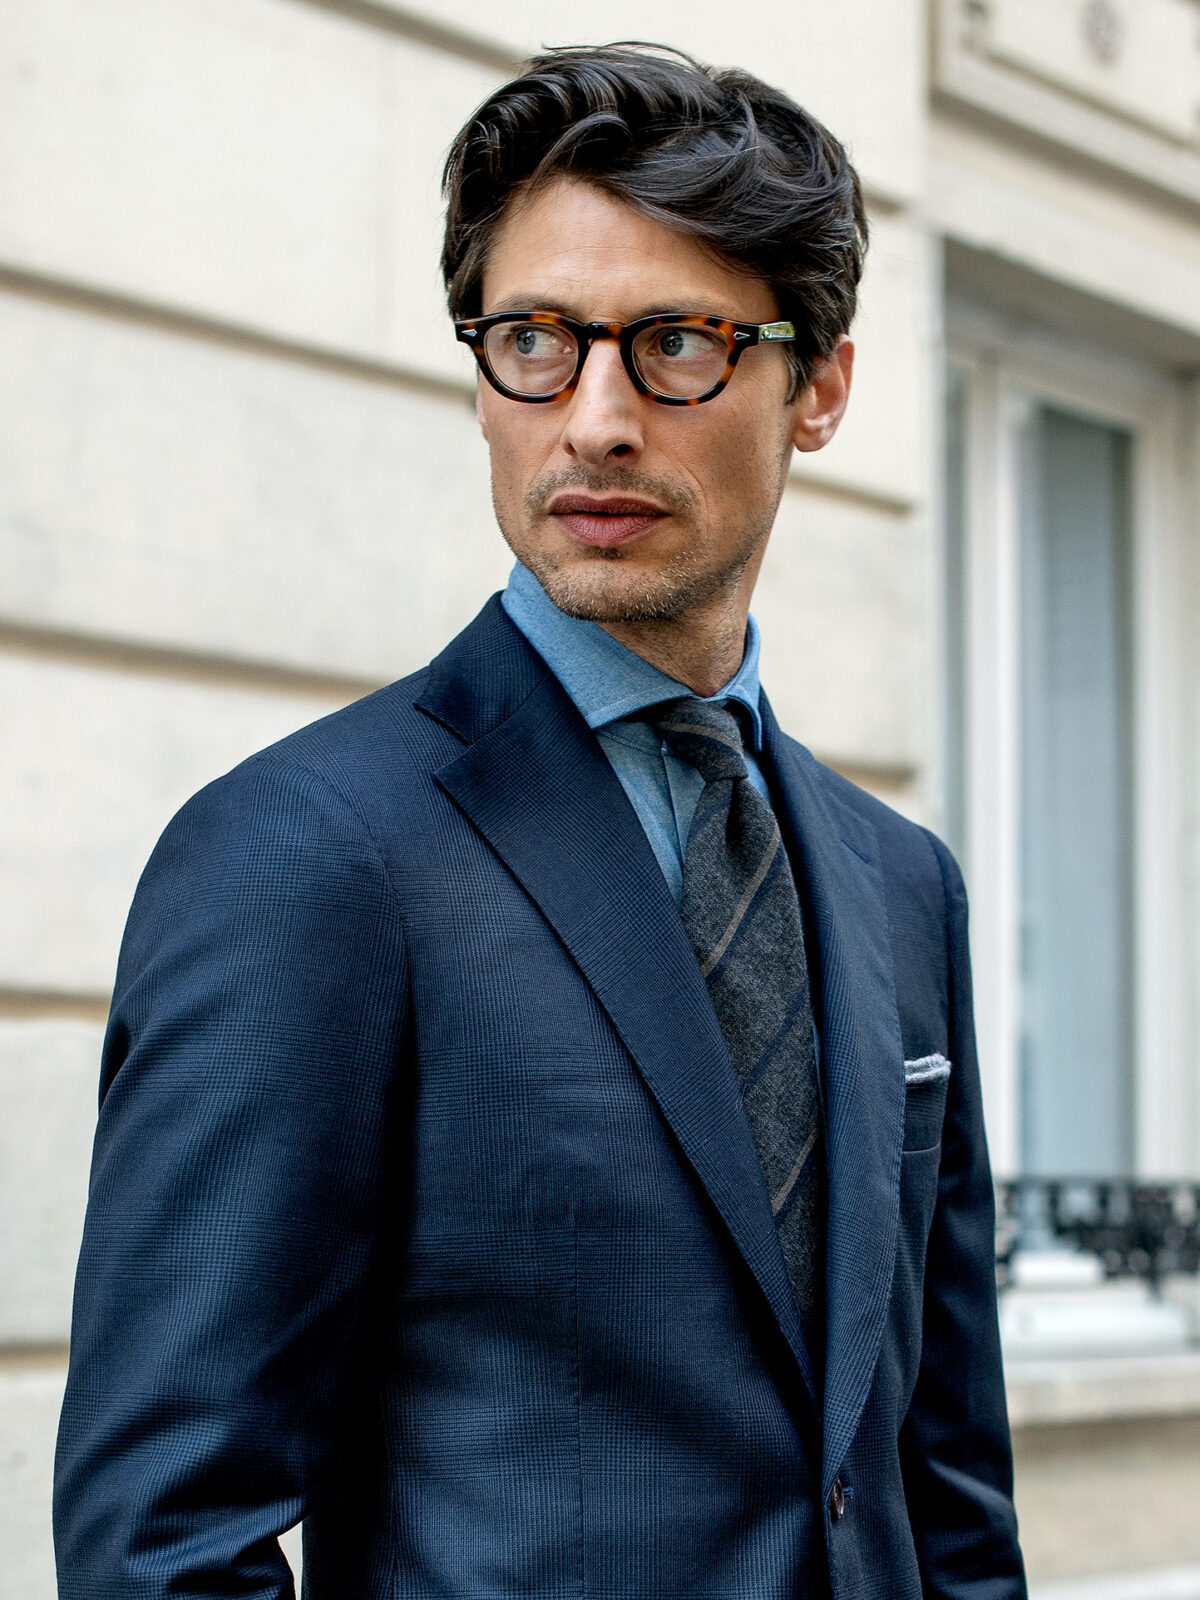 Grey and Navy Striped Wool Tie